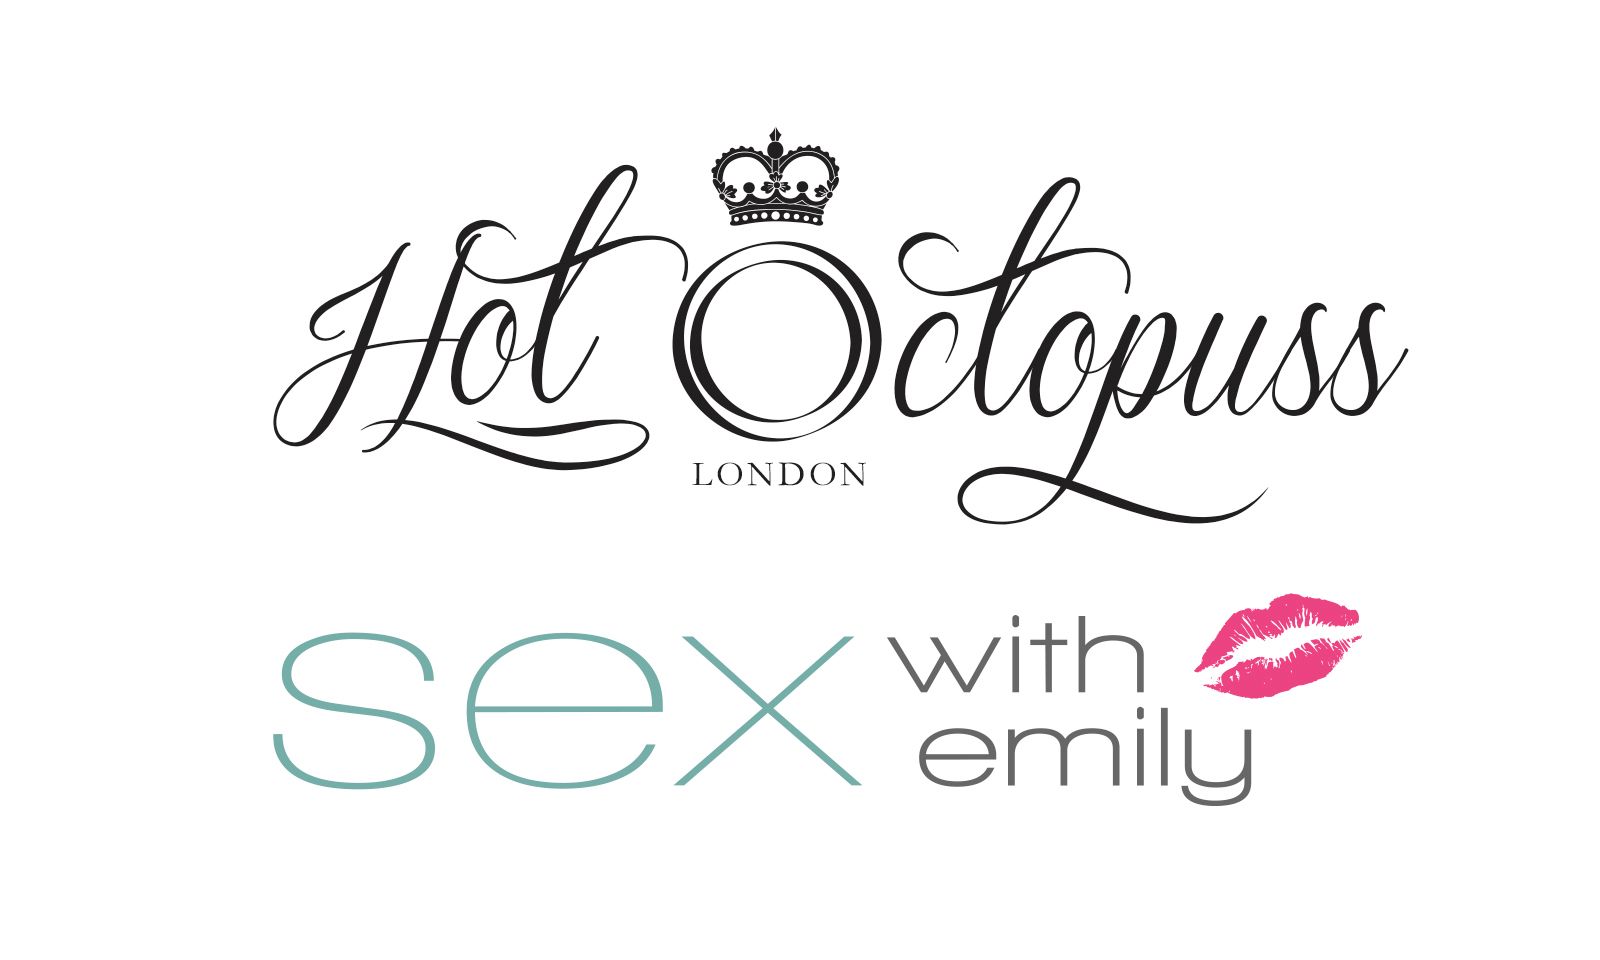 Sex with Emily Joins With Hot Octopuss For Marketing Campaign